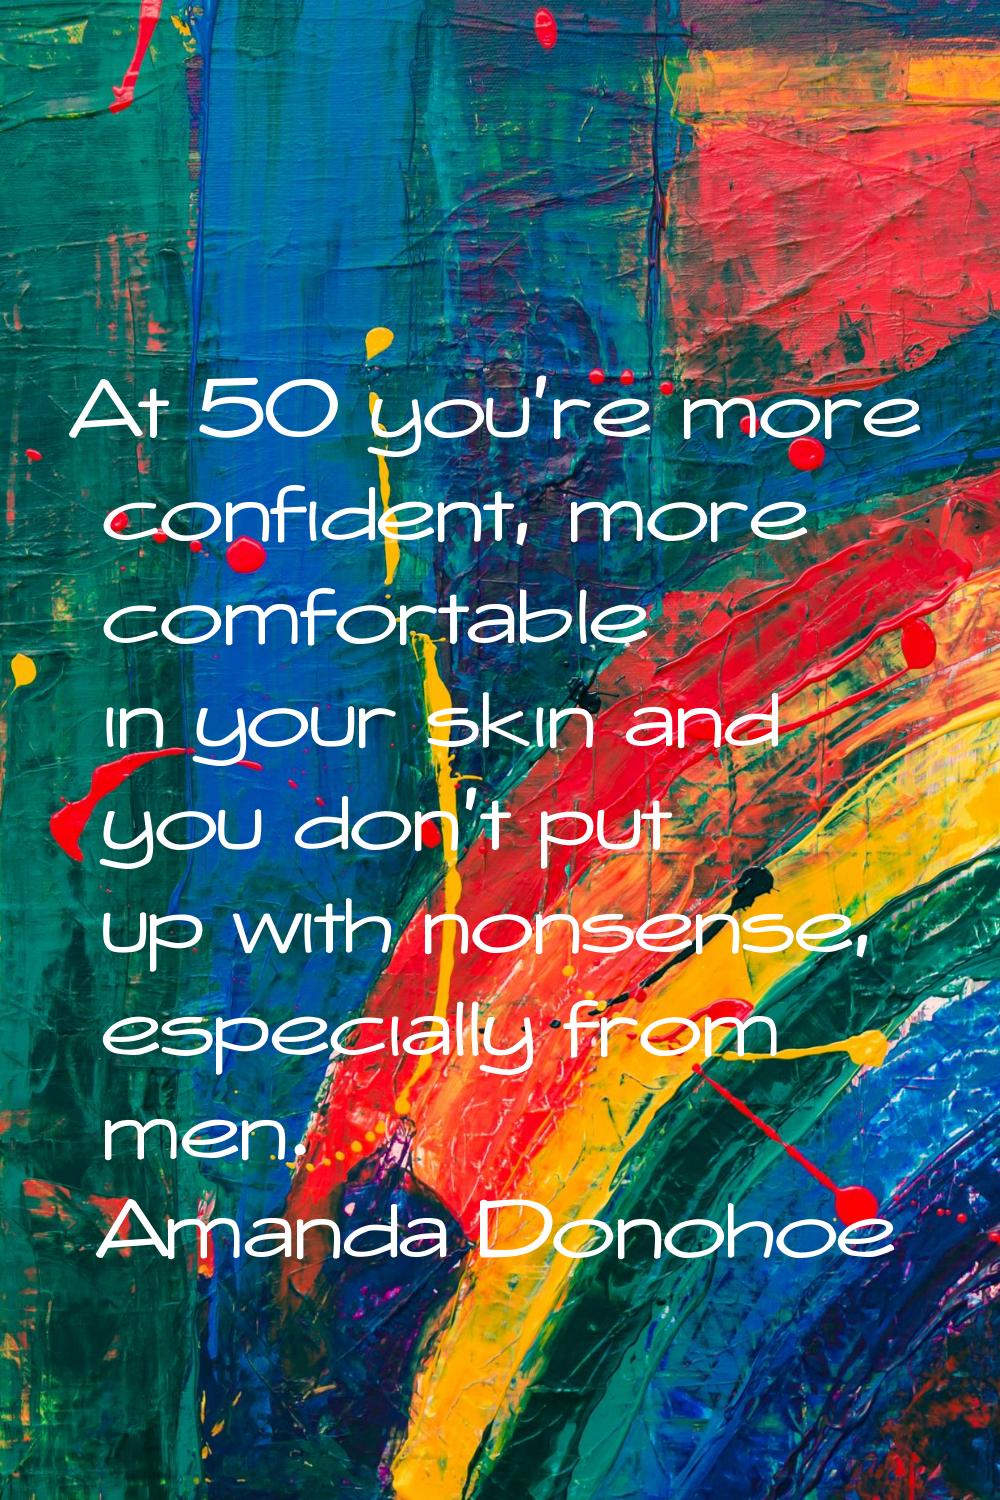 At 50 you're more confident, more comfortable in your skin and you don't put up with nonsense, espe